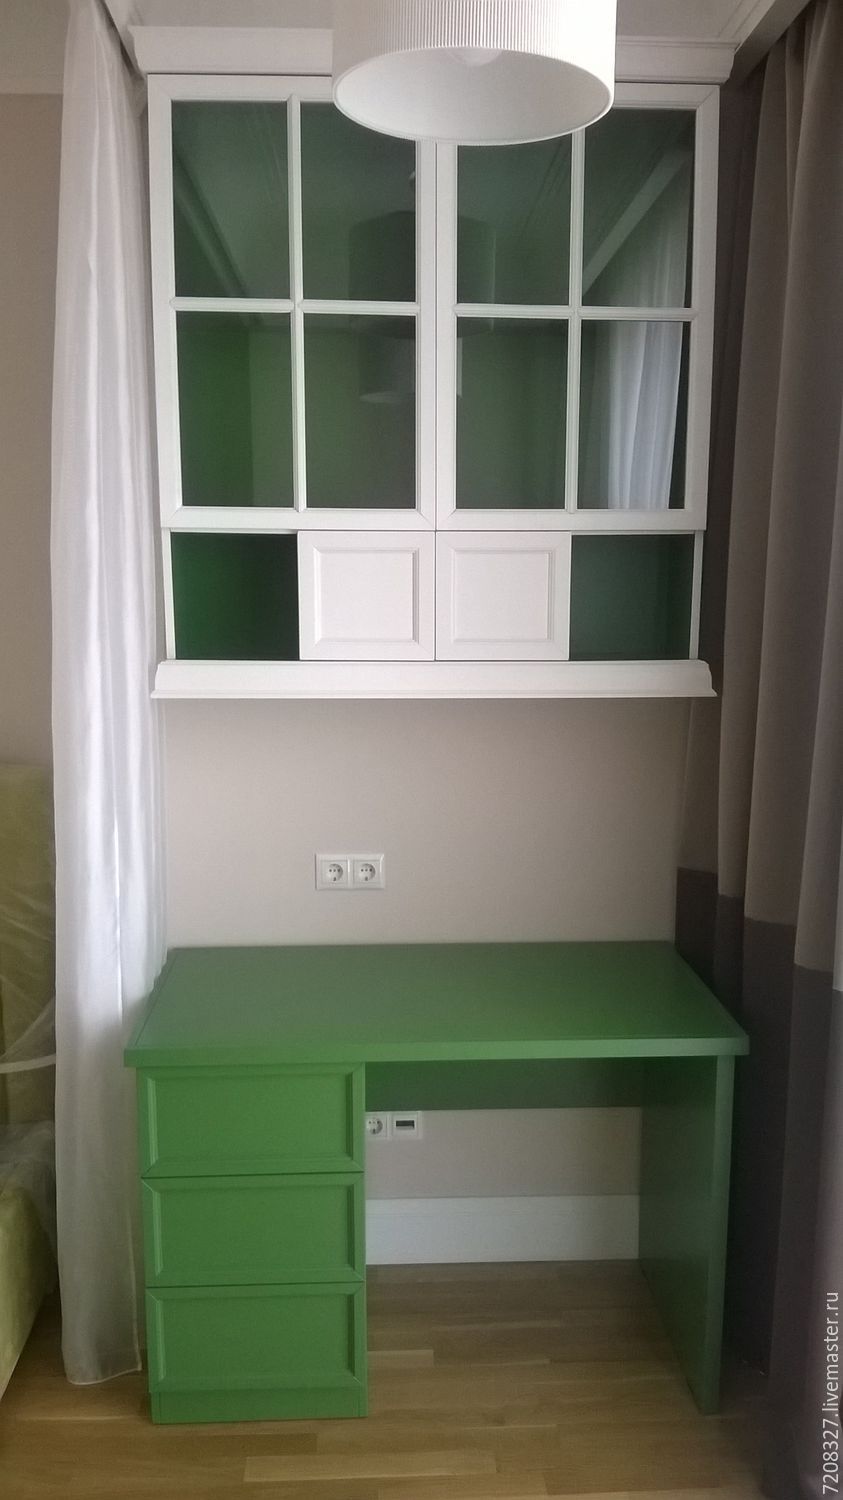 Wall Cabinet shelf with glass doors. Roomy, comfortable, beautiful and concise. The difference in color, size, materials is possible through manual work.